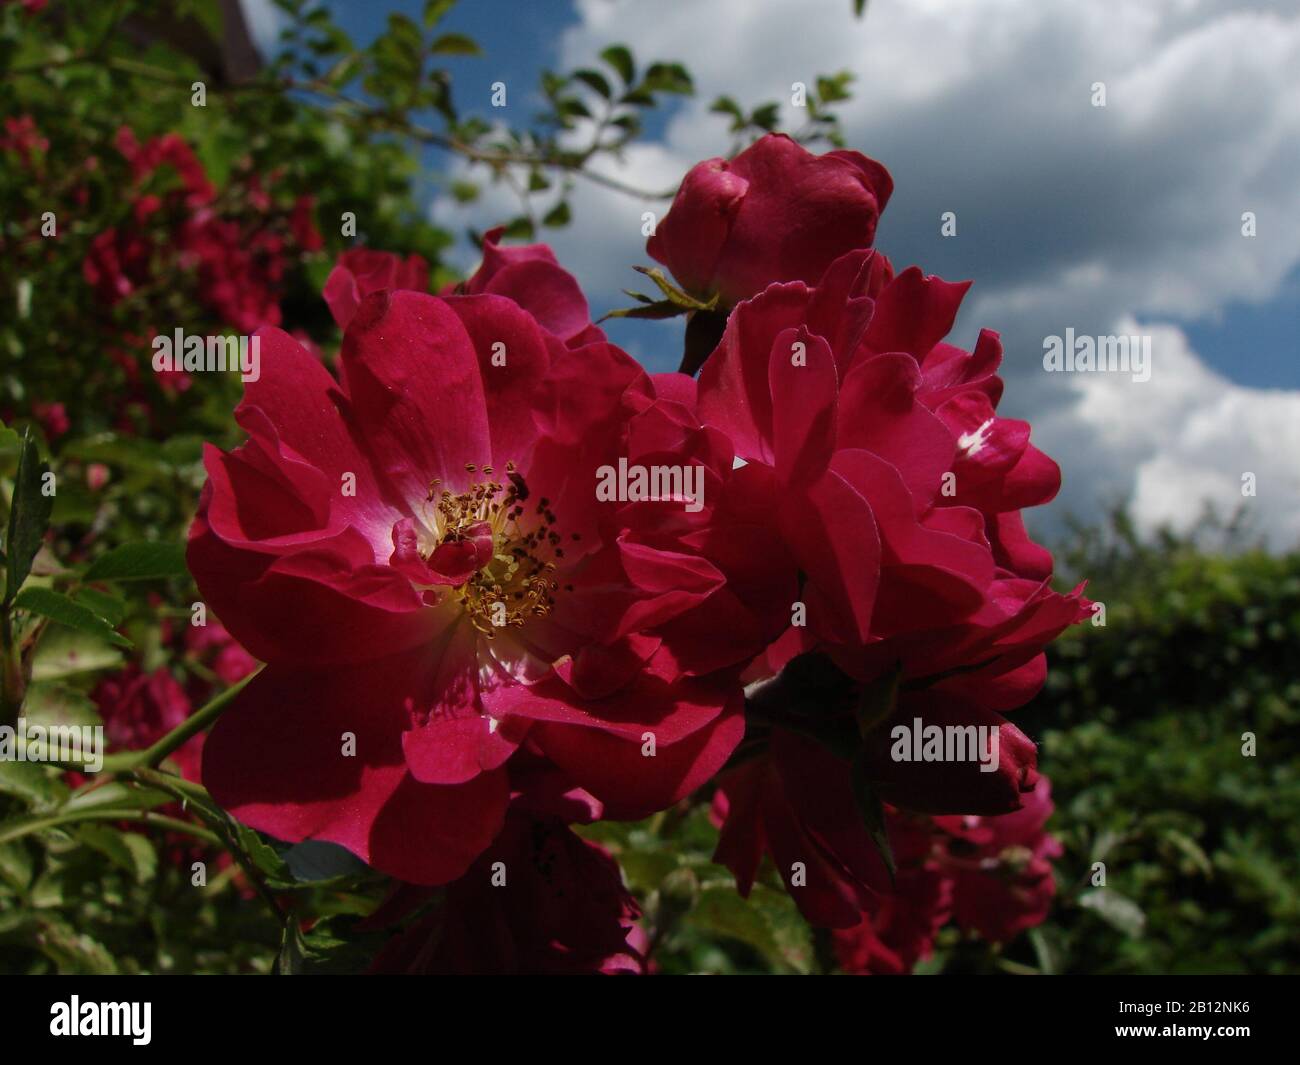 beautiful roses bloom in the garden Stock Photo